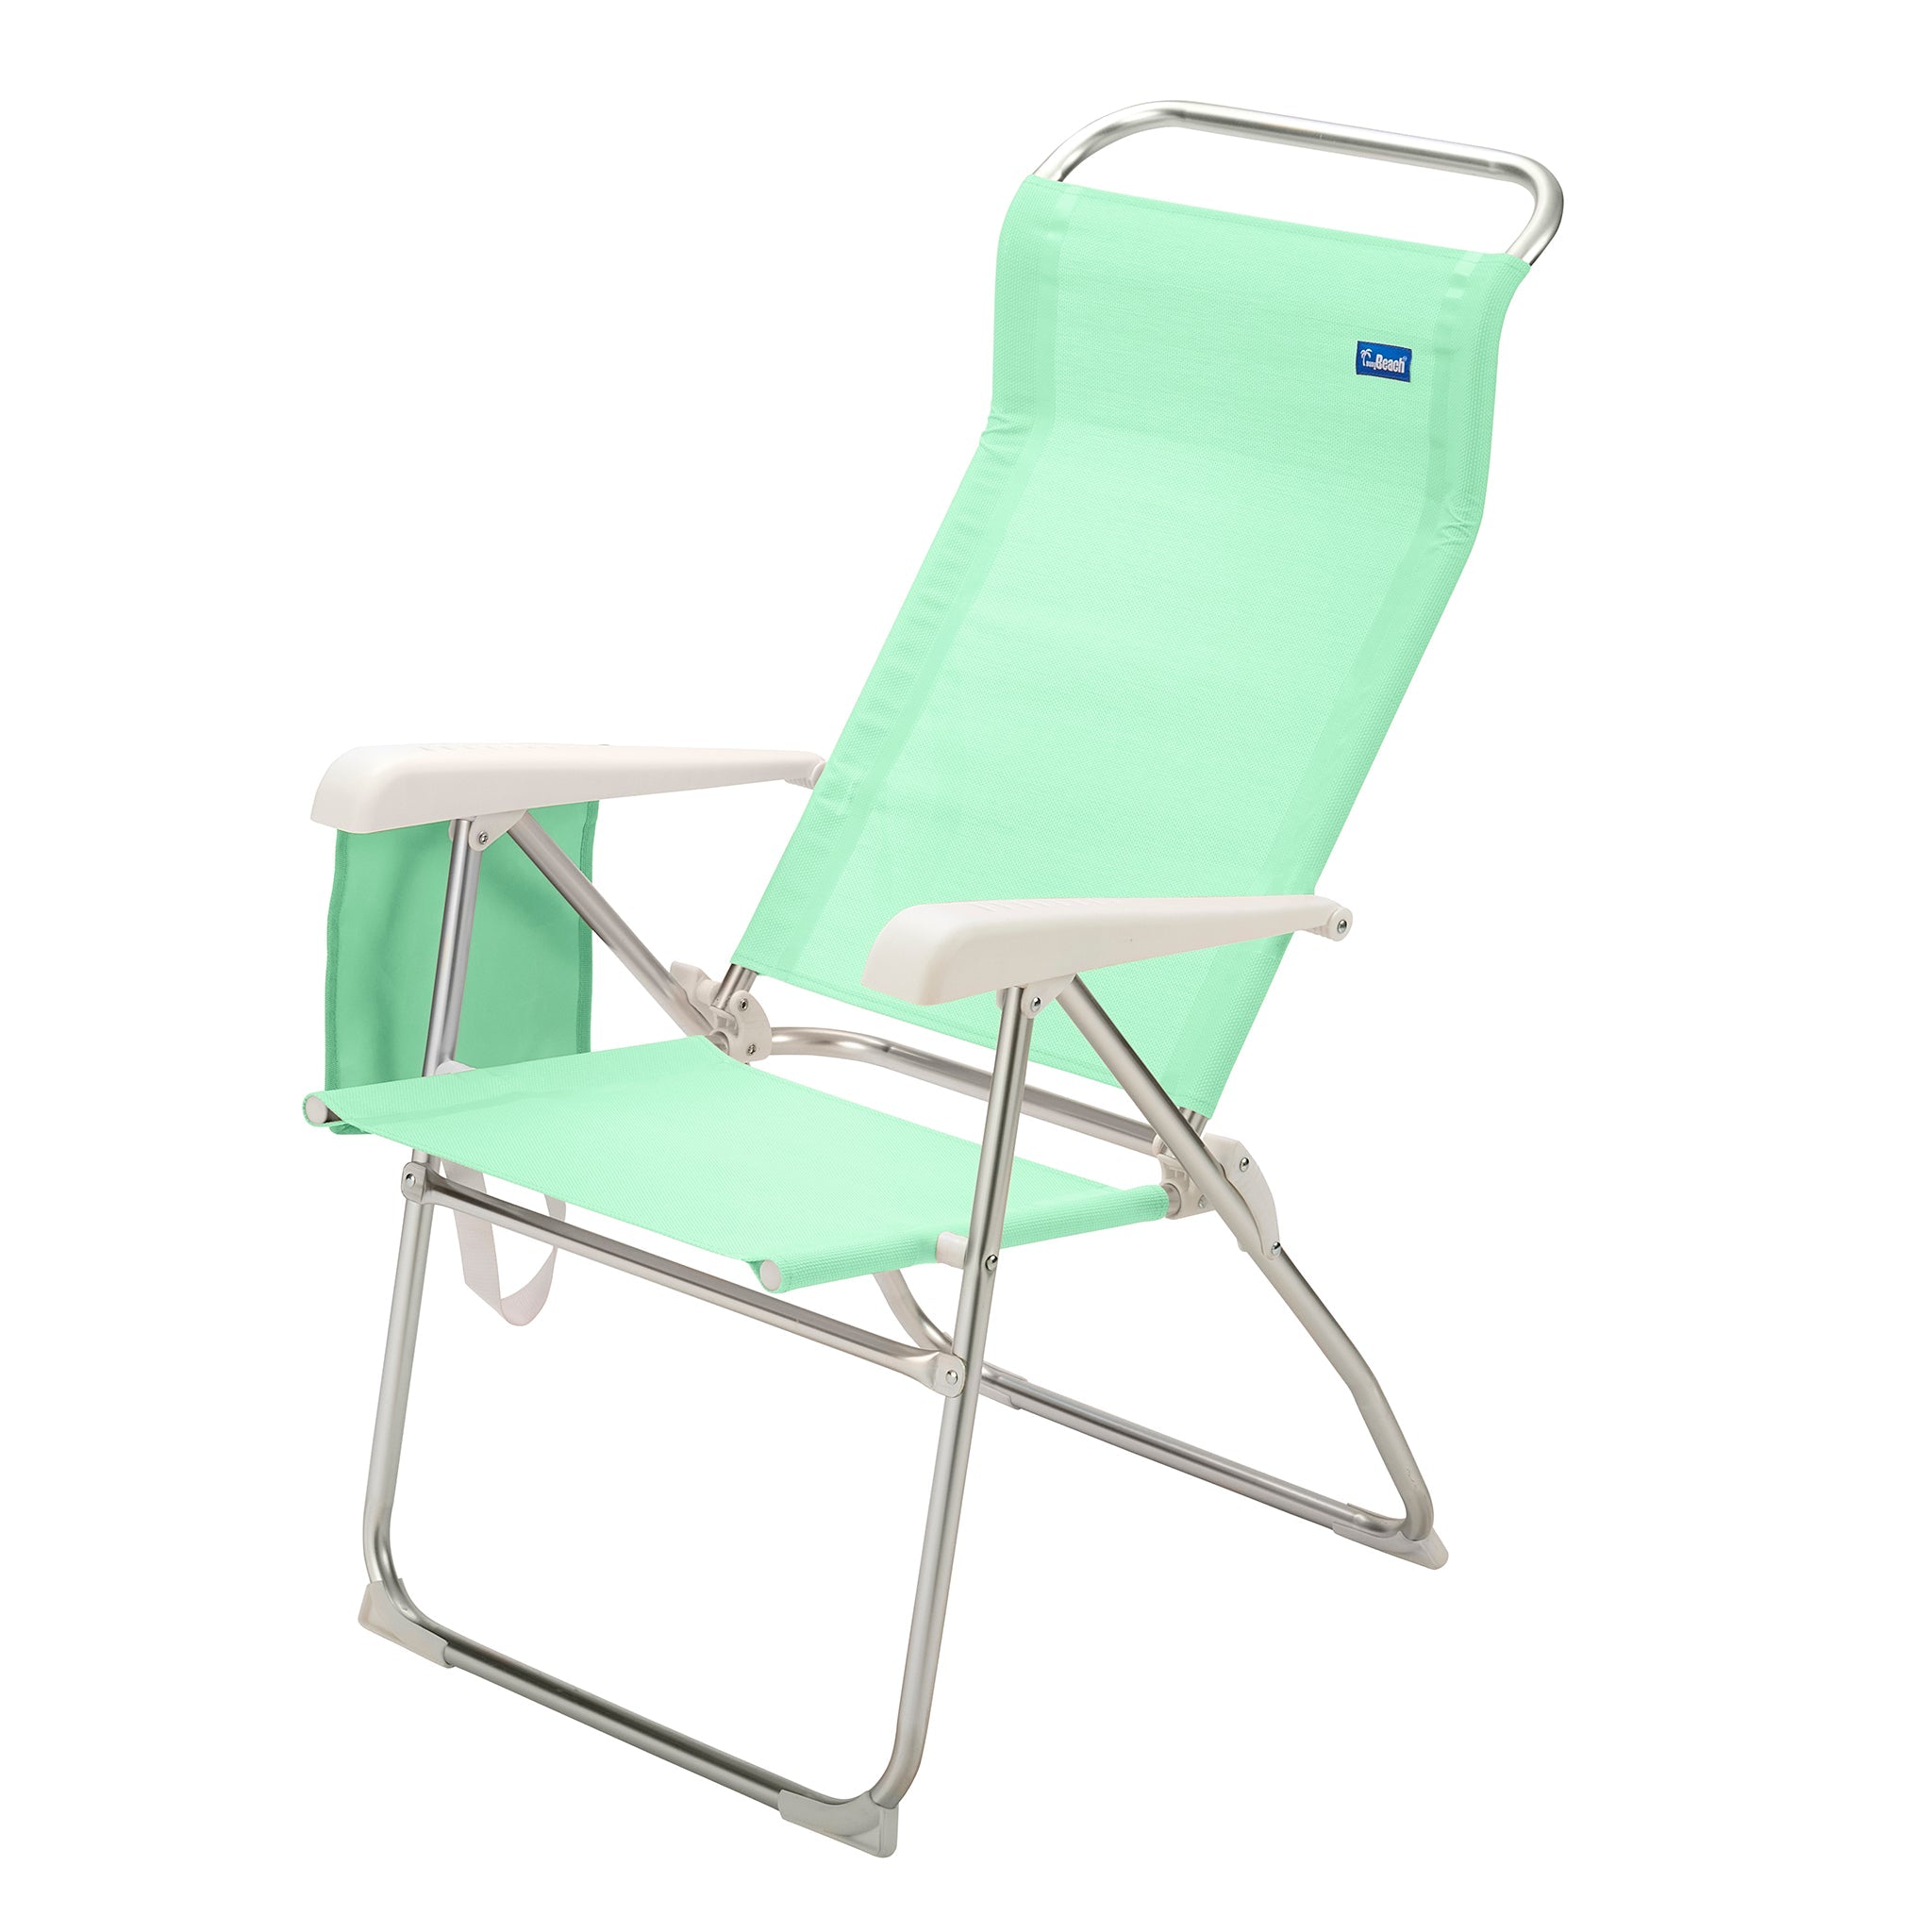 Wholesale Tall 8-Postion Beach Chairs - Case Pack of 4